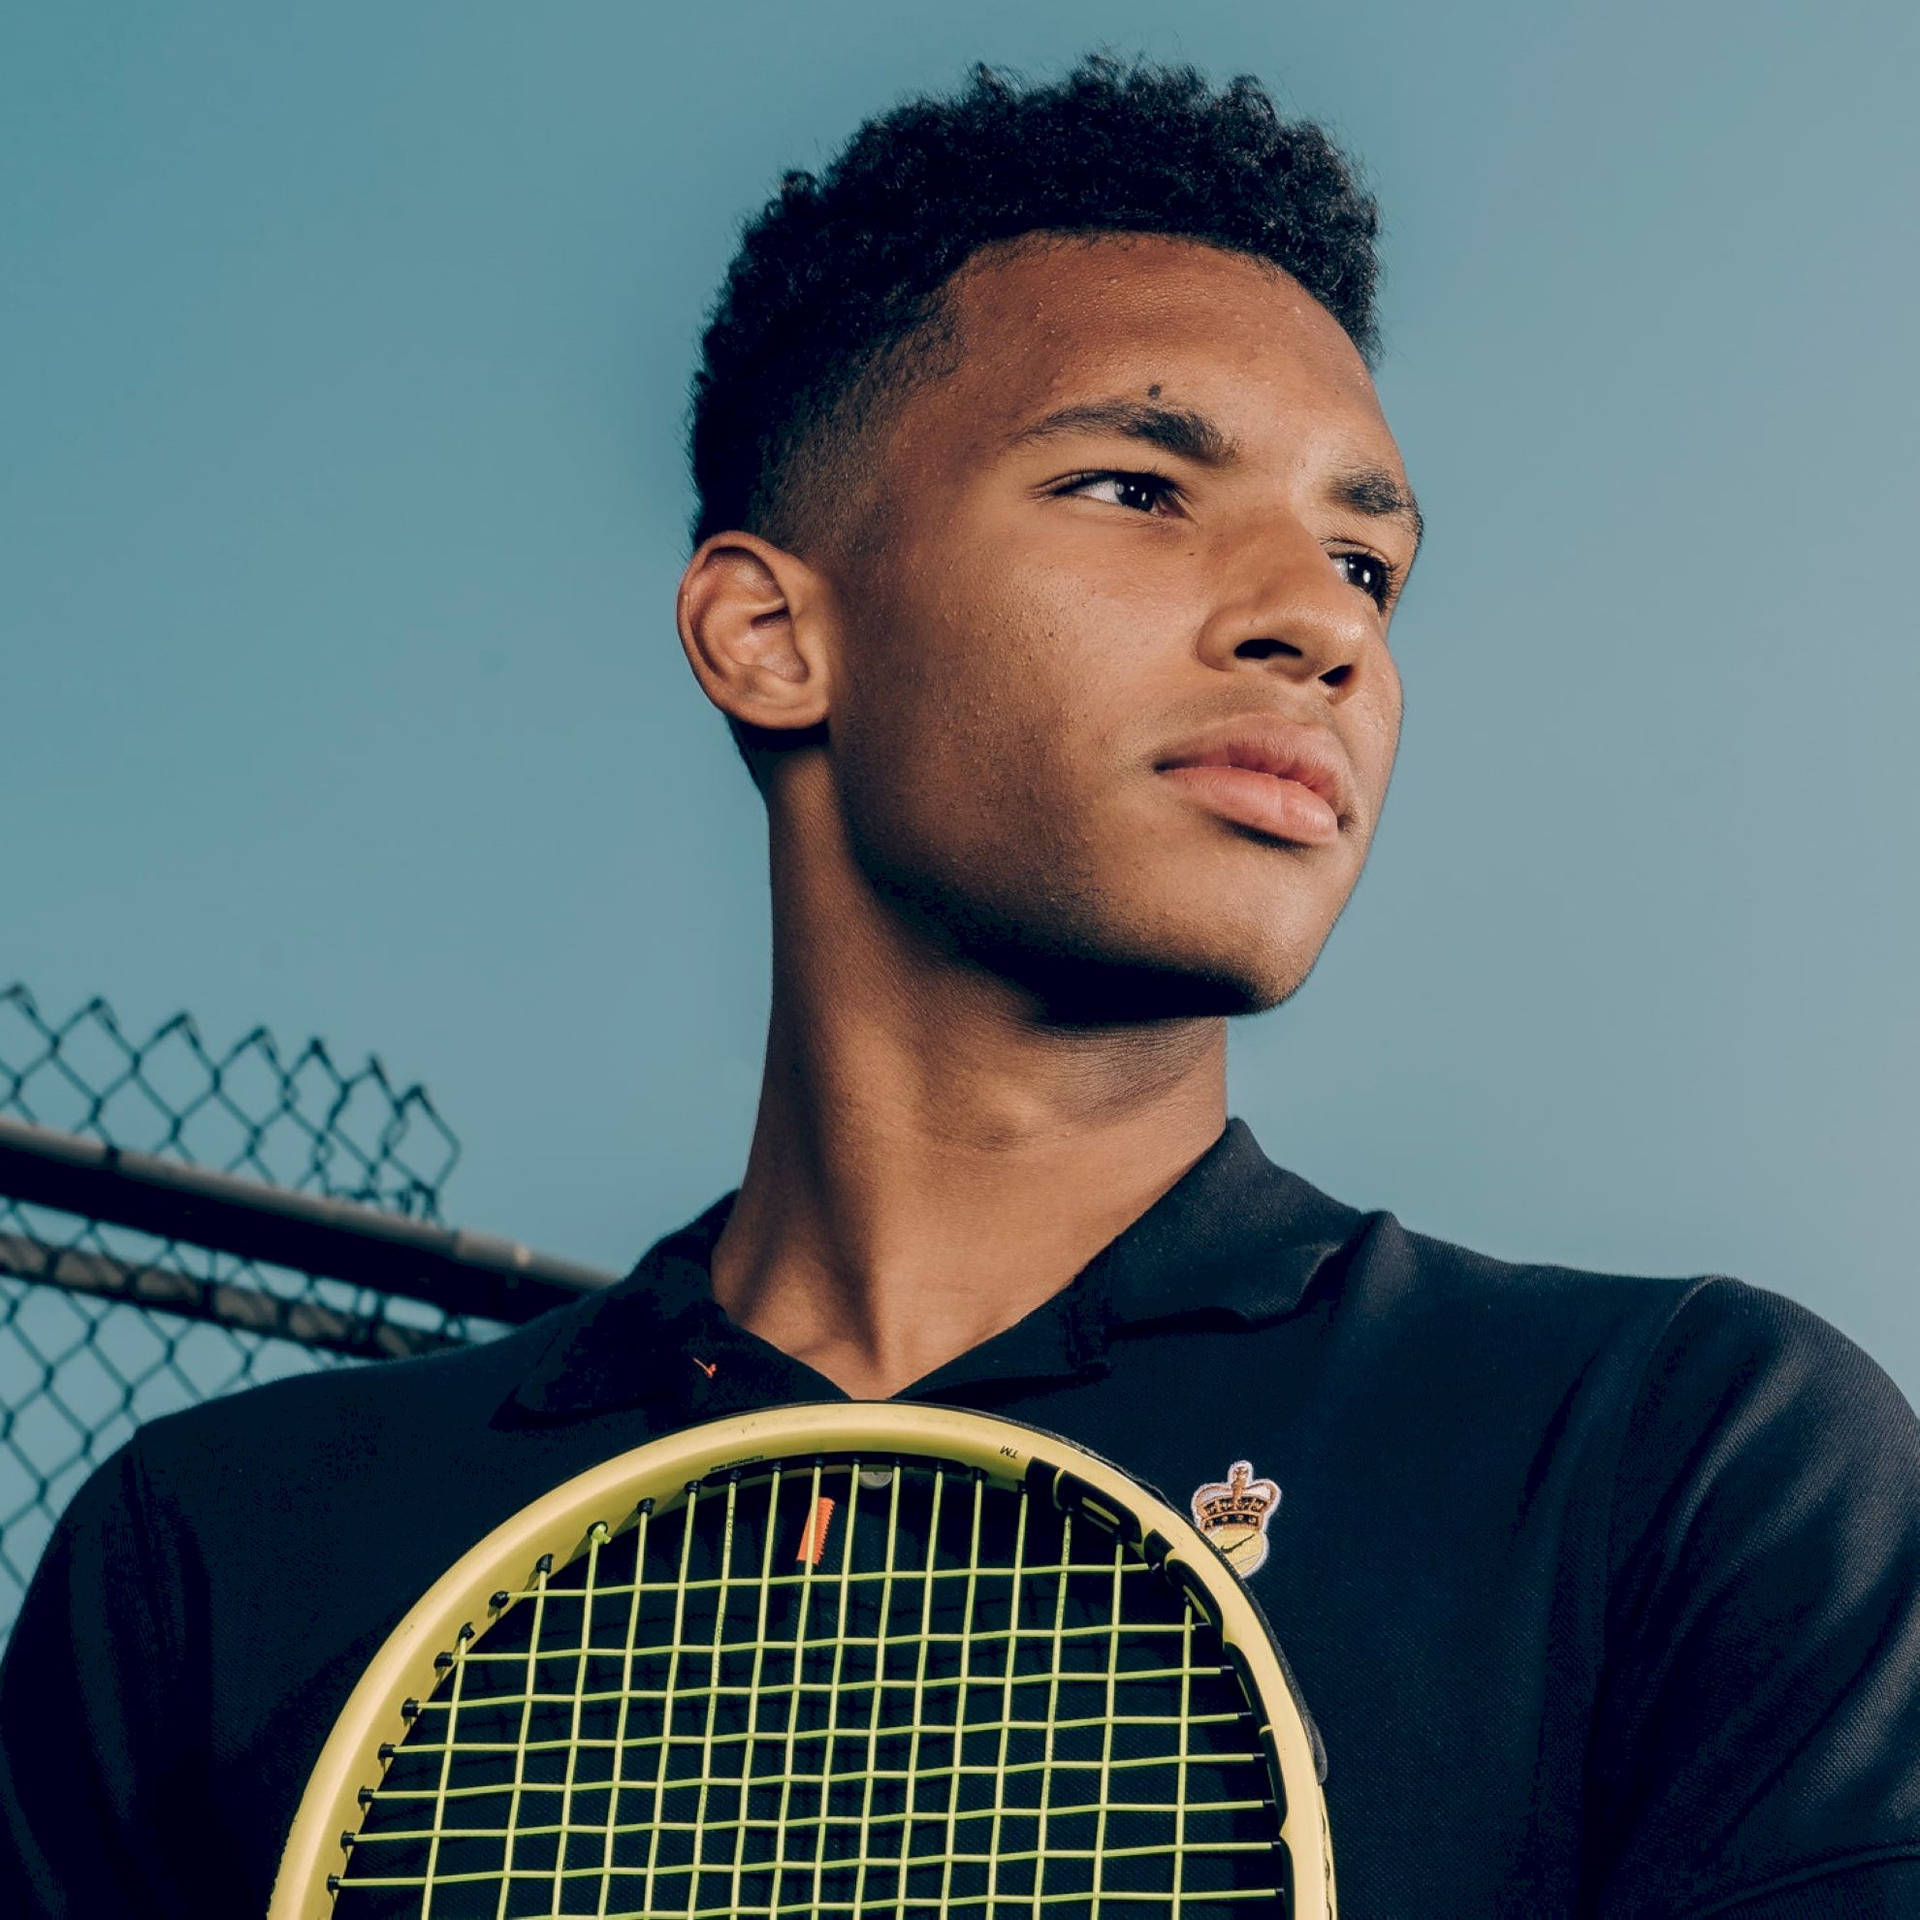 Felix Auger-Aliassime in Thoughtful Contemplation Wallpaper